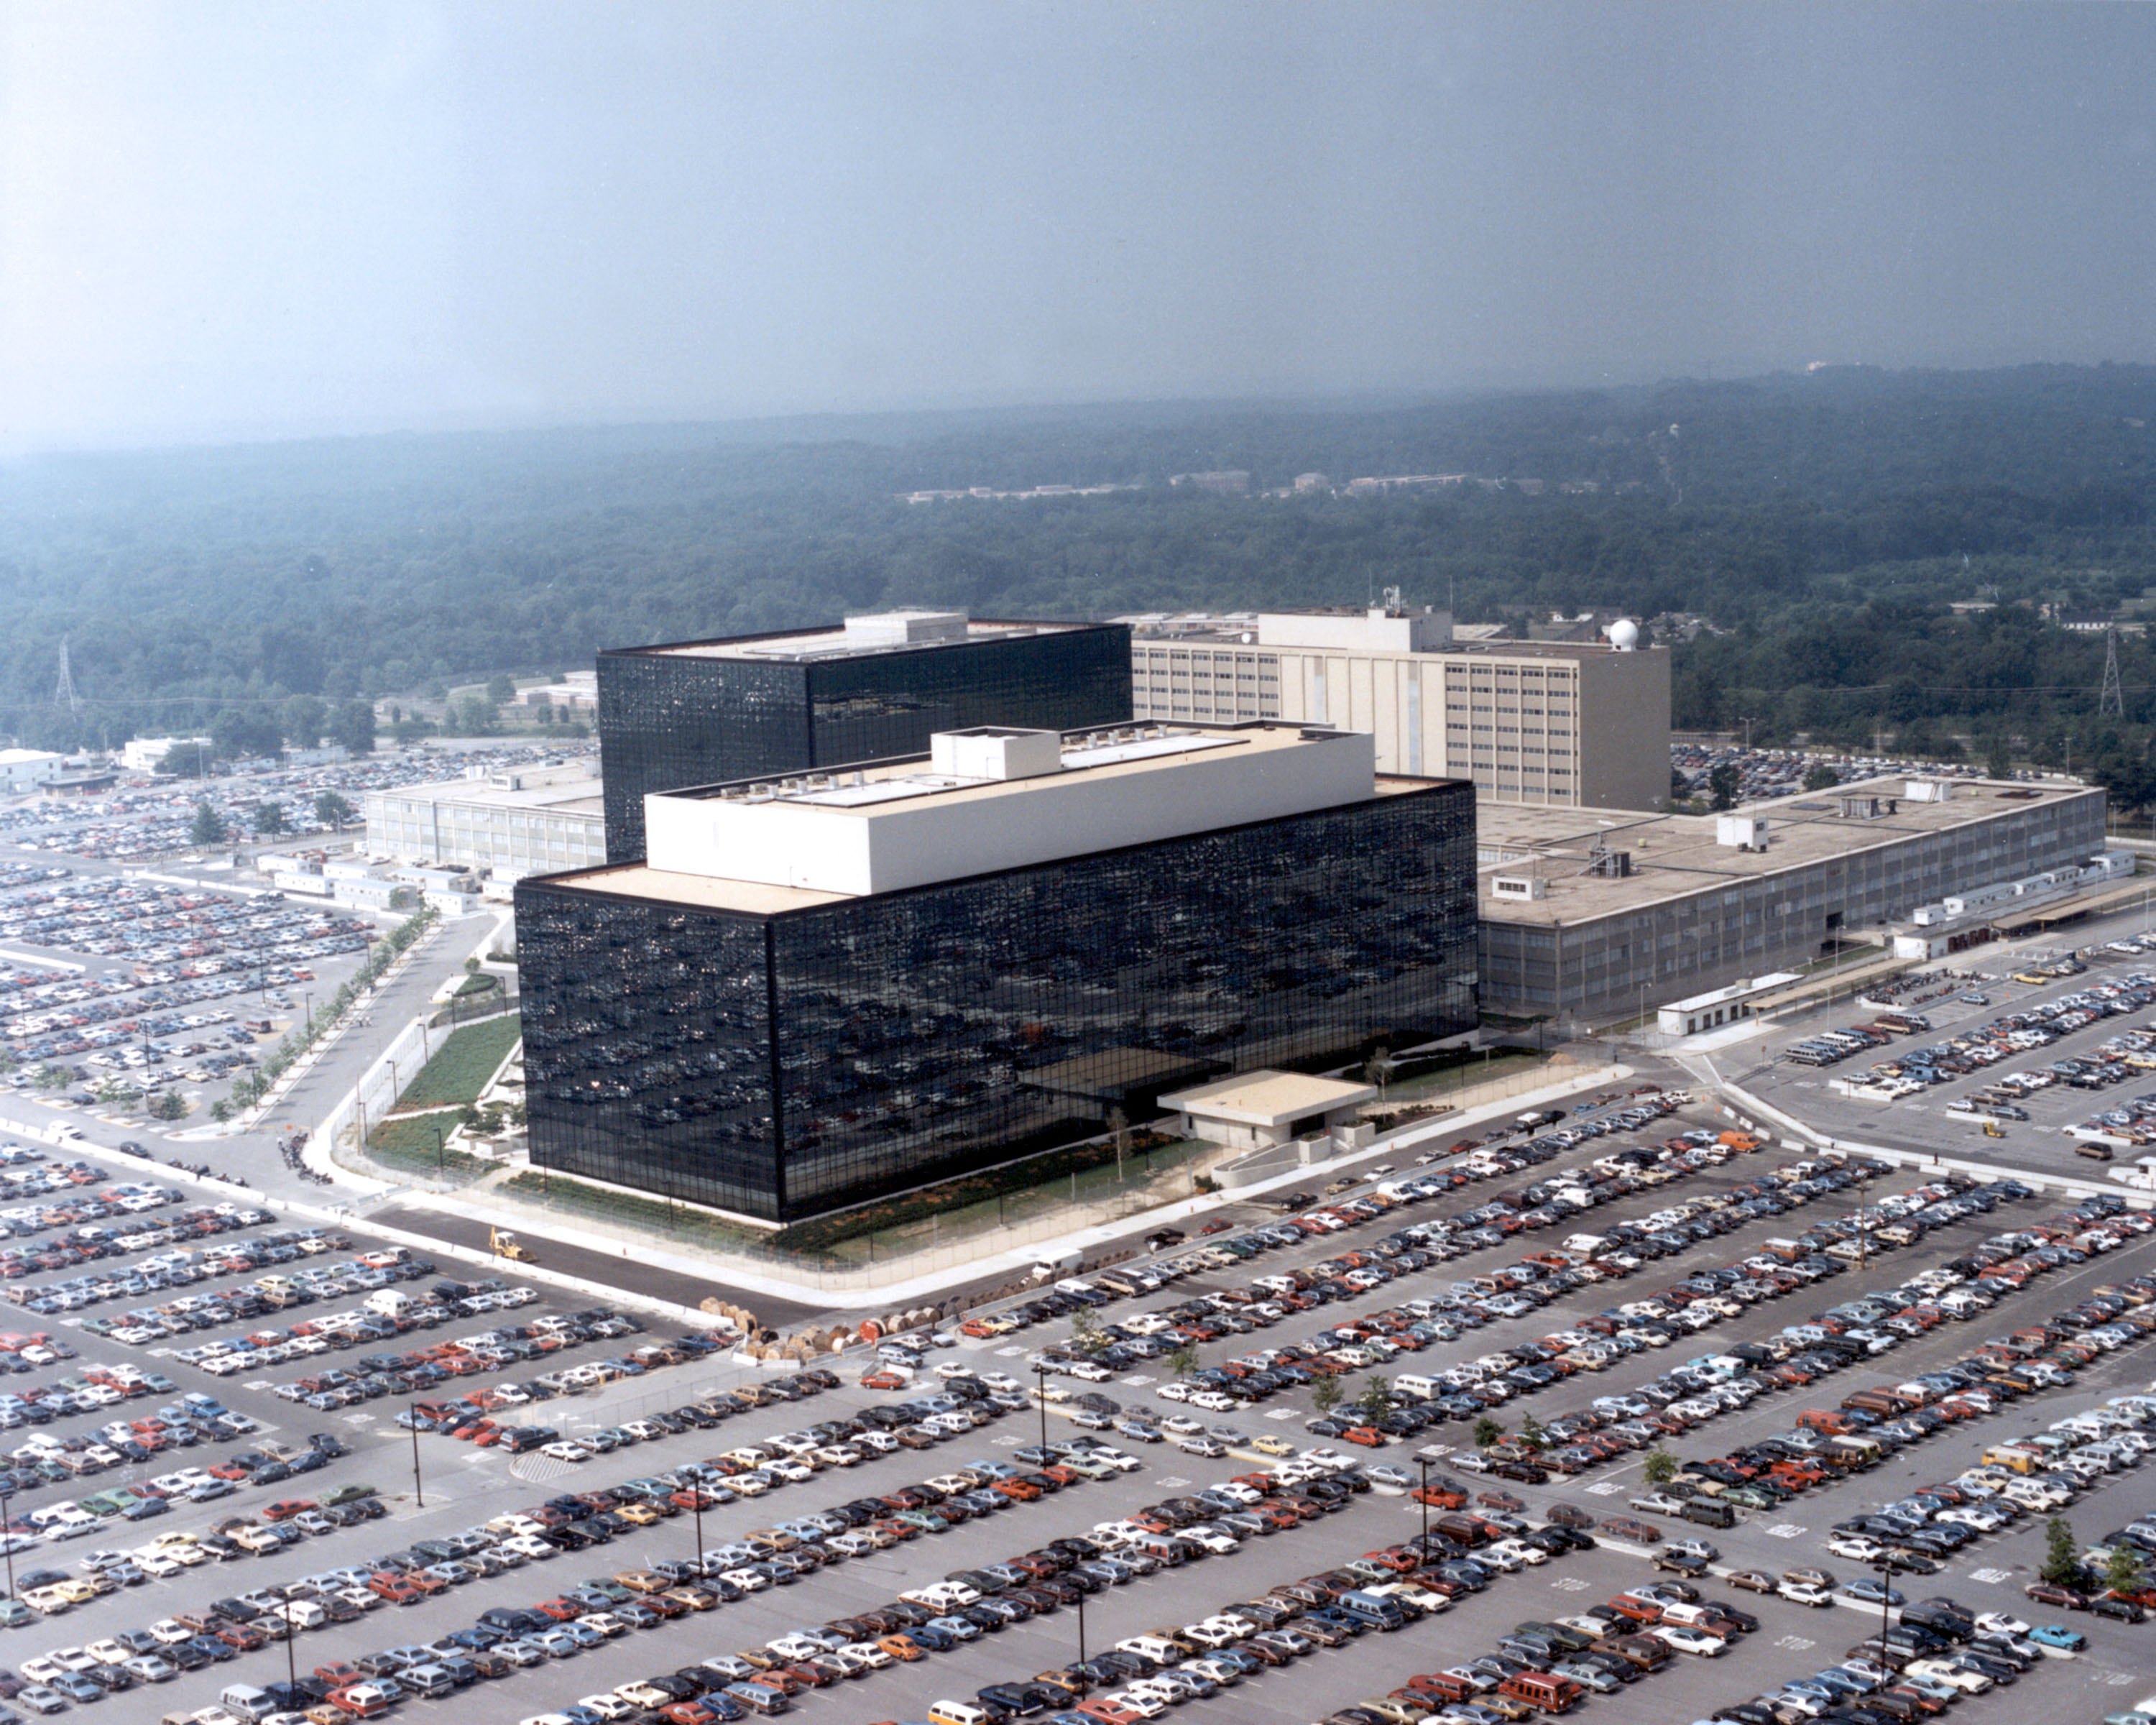 The National Security Agency (NSA) headquarters in Fort Meade, Md. (Getty Images)